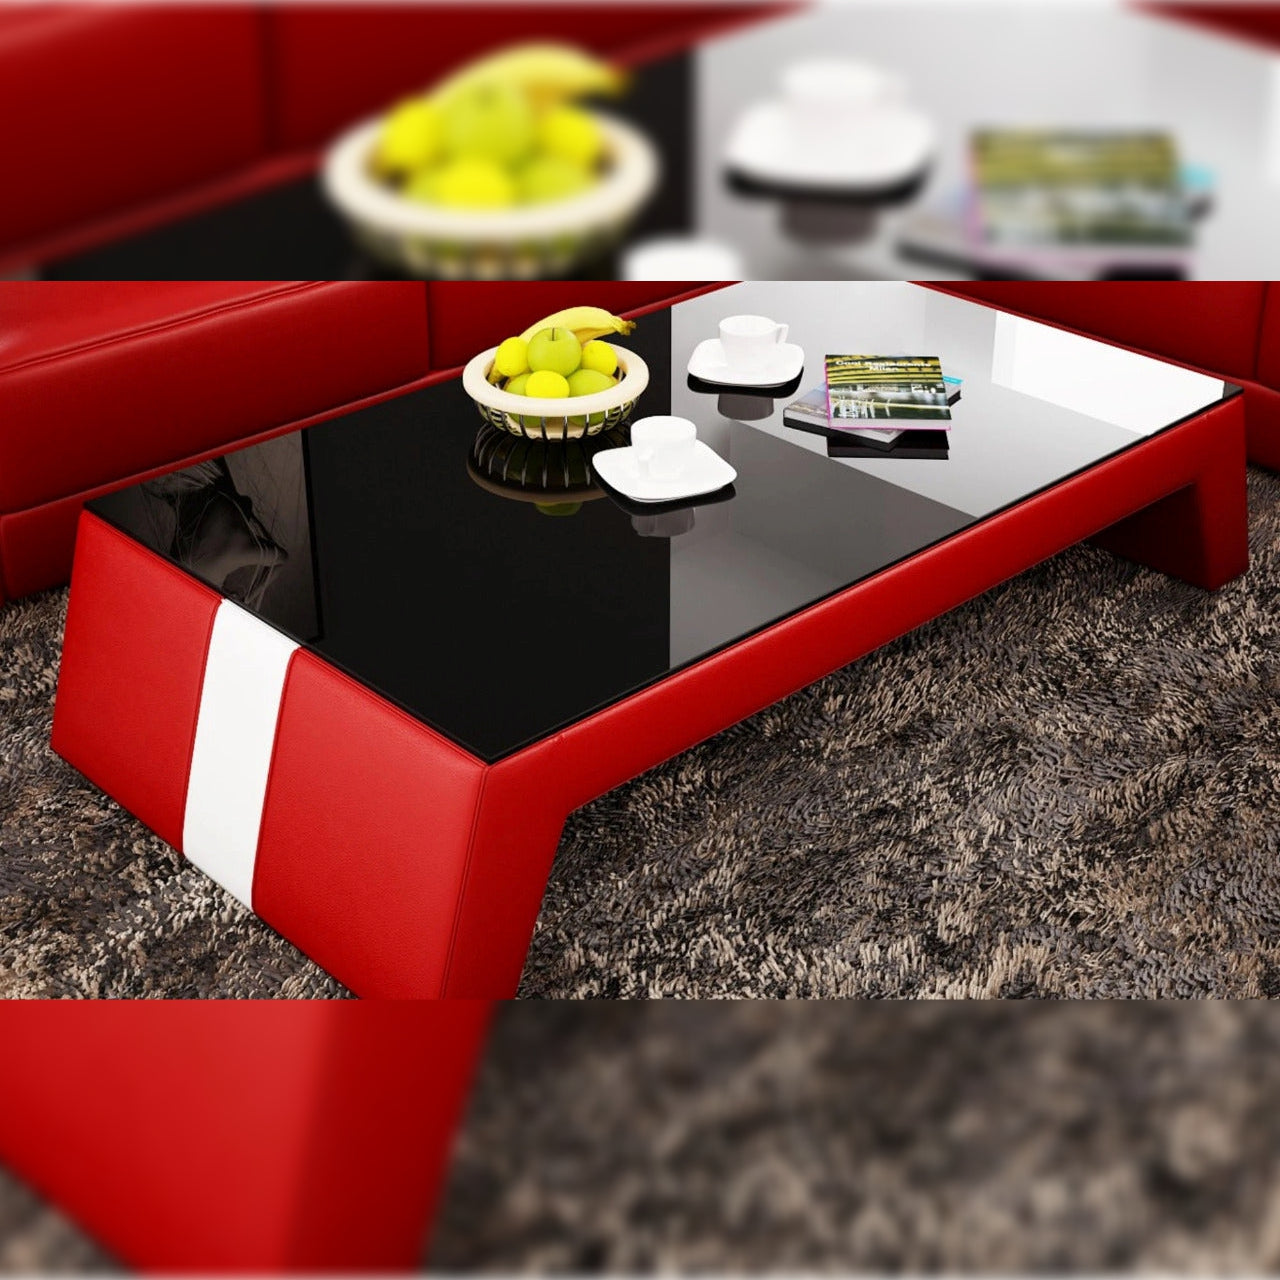 Leatherette Coffee Table Contemporary Red Leatherette Coffee Table WBlack Glass Table Top